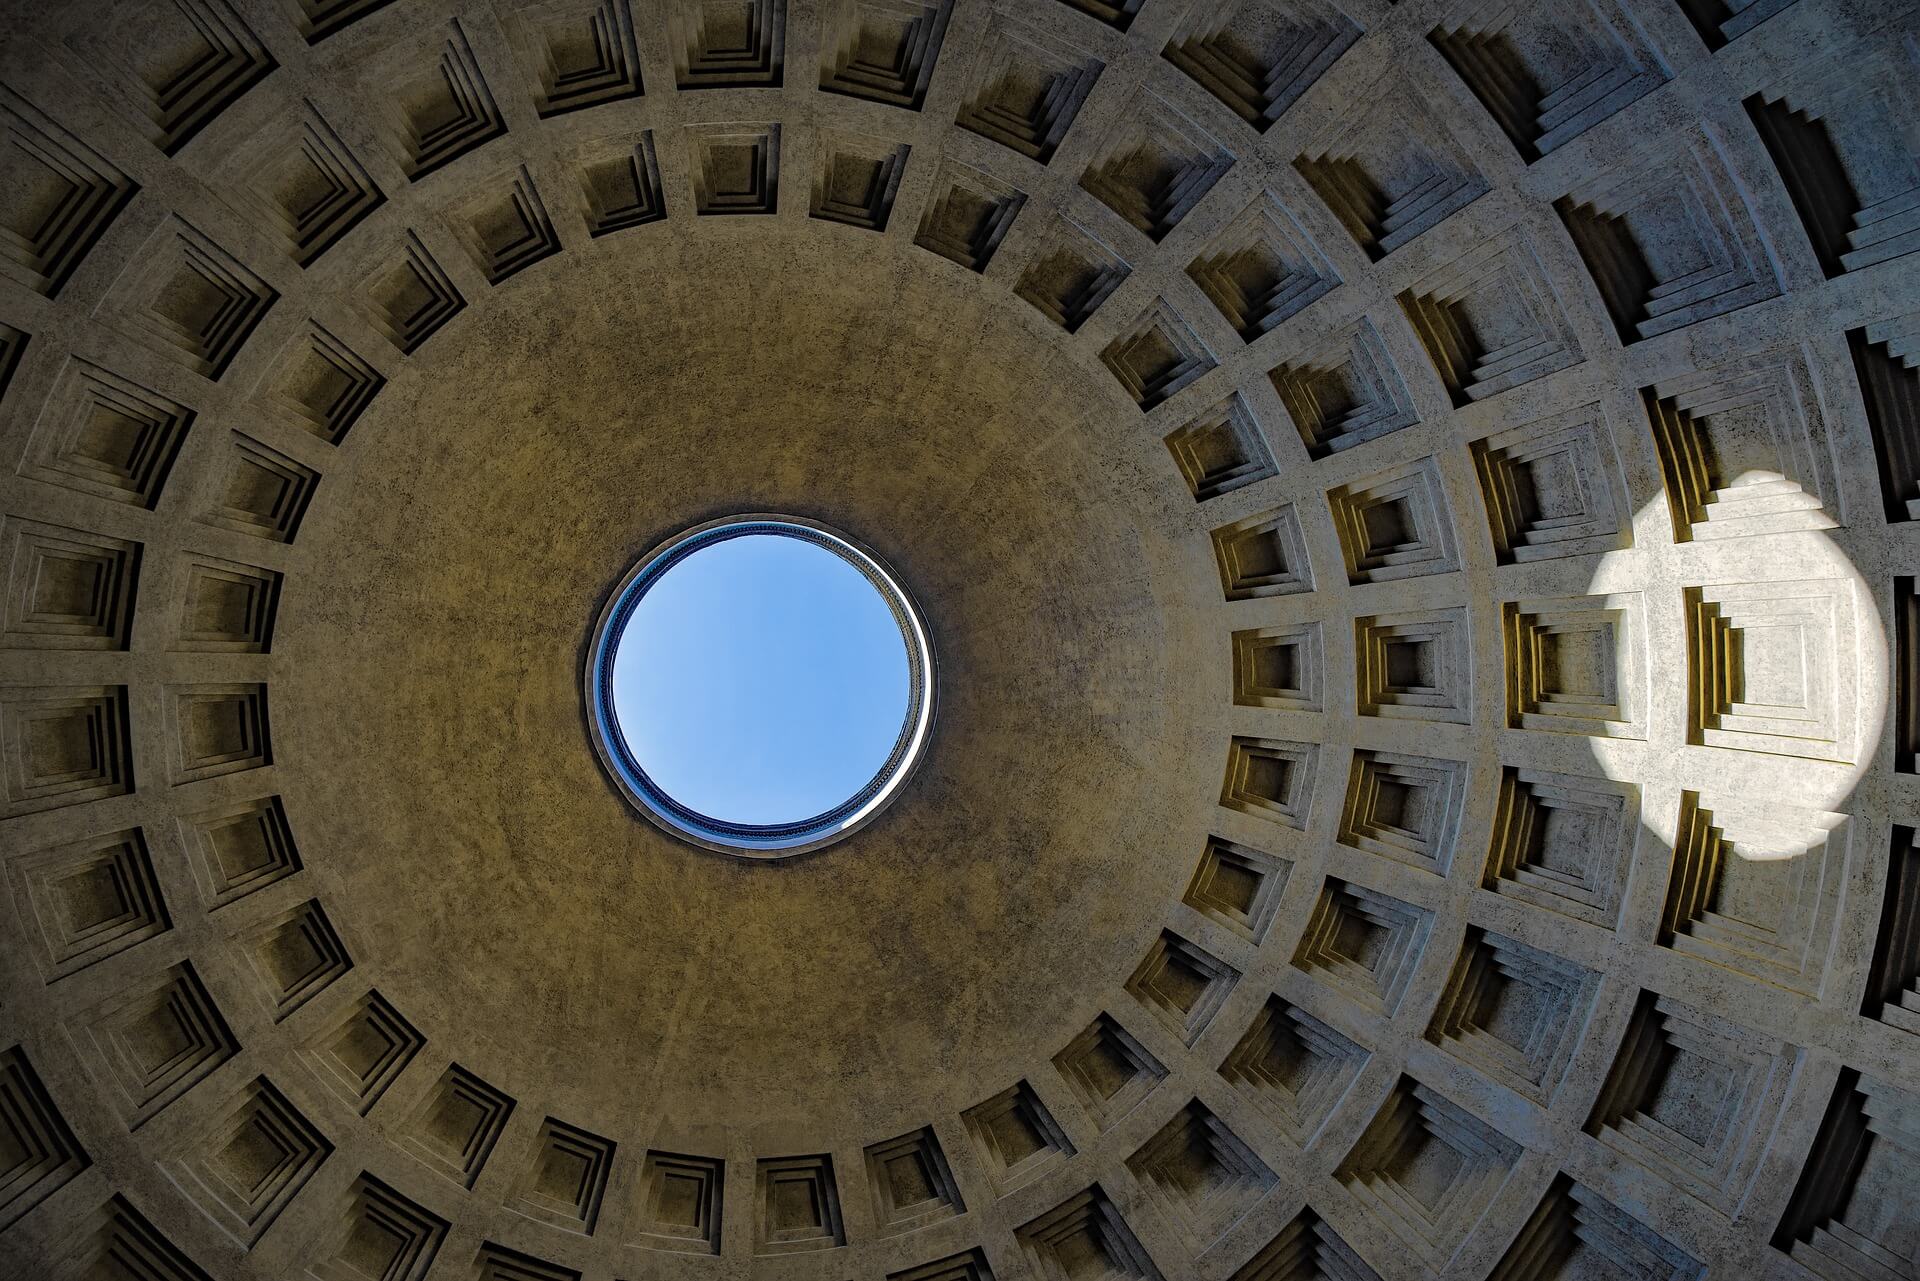 The oculus and dome of the Pantheon